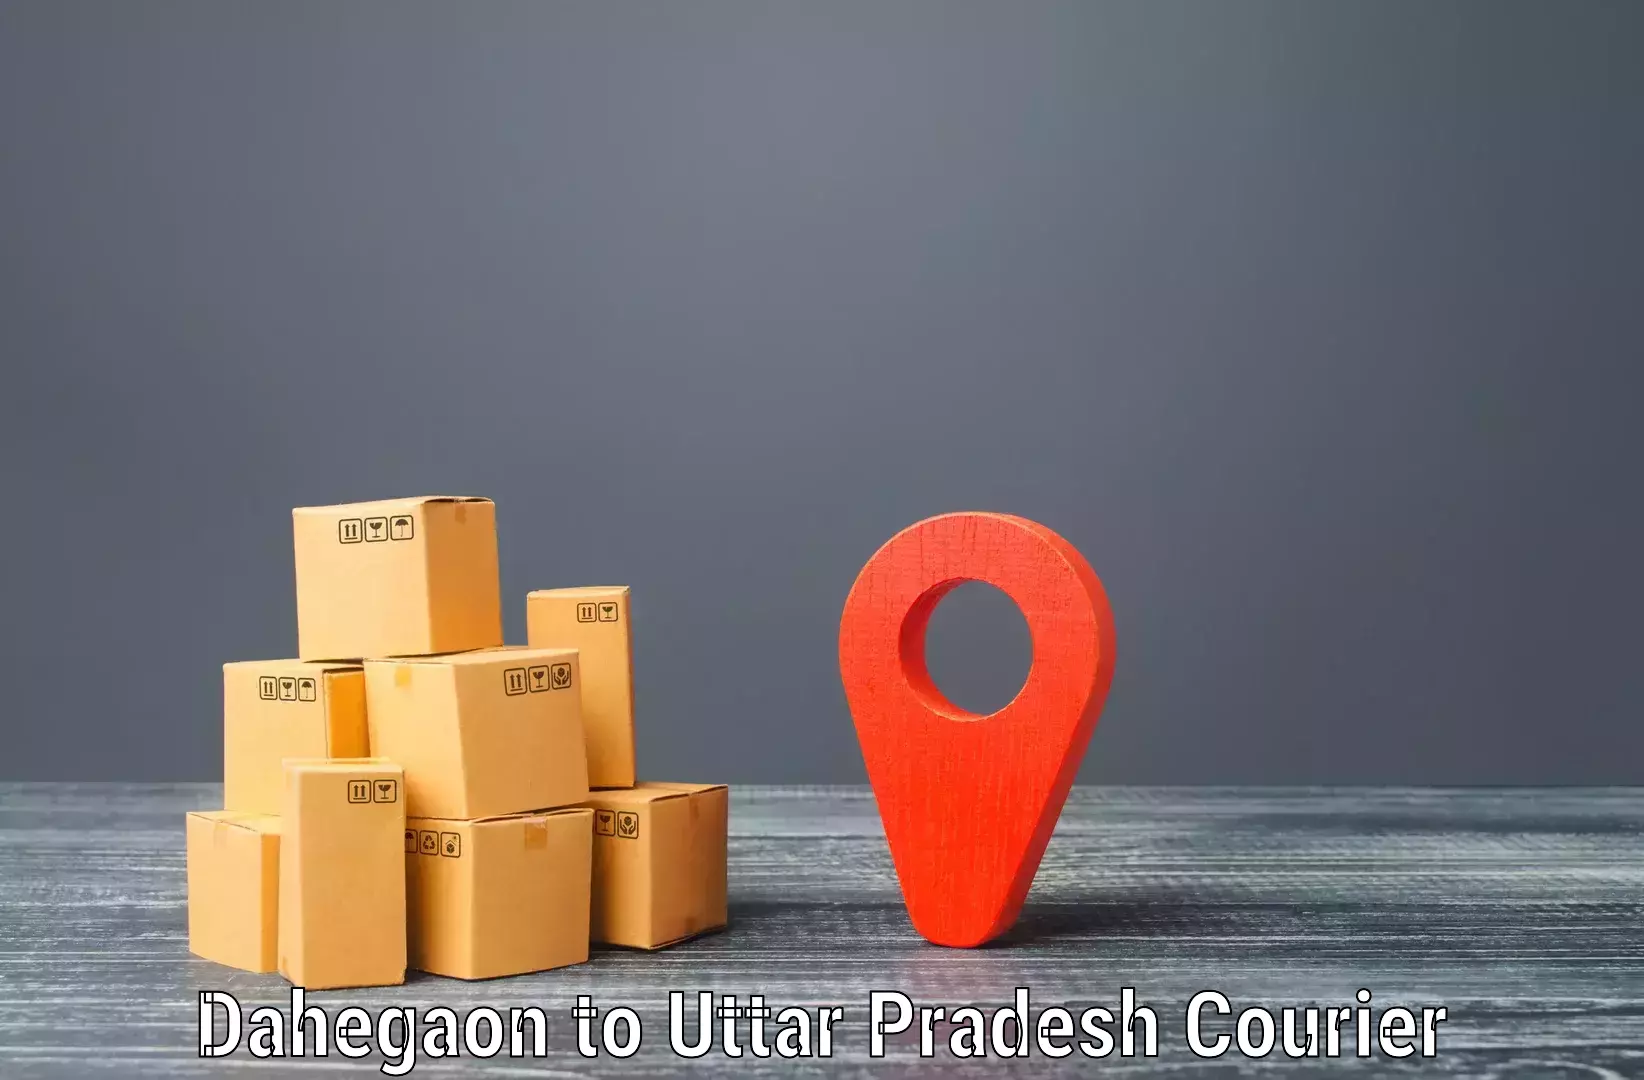 Courier service partnerships in Dahegaon to Chhata